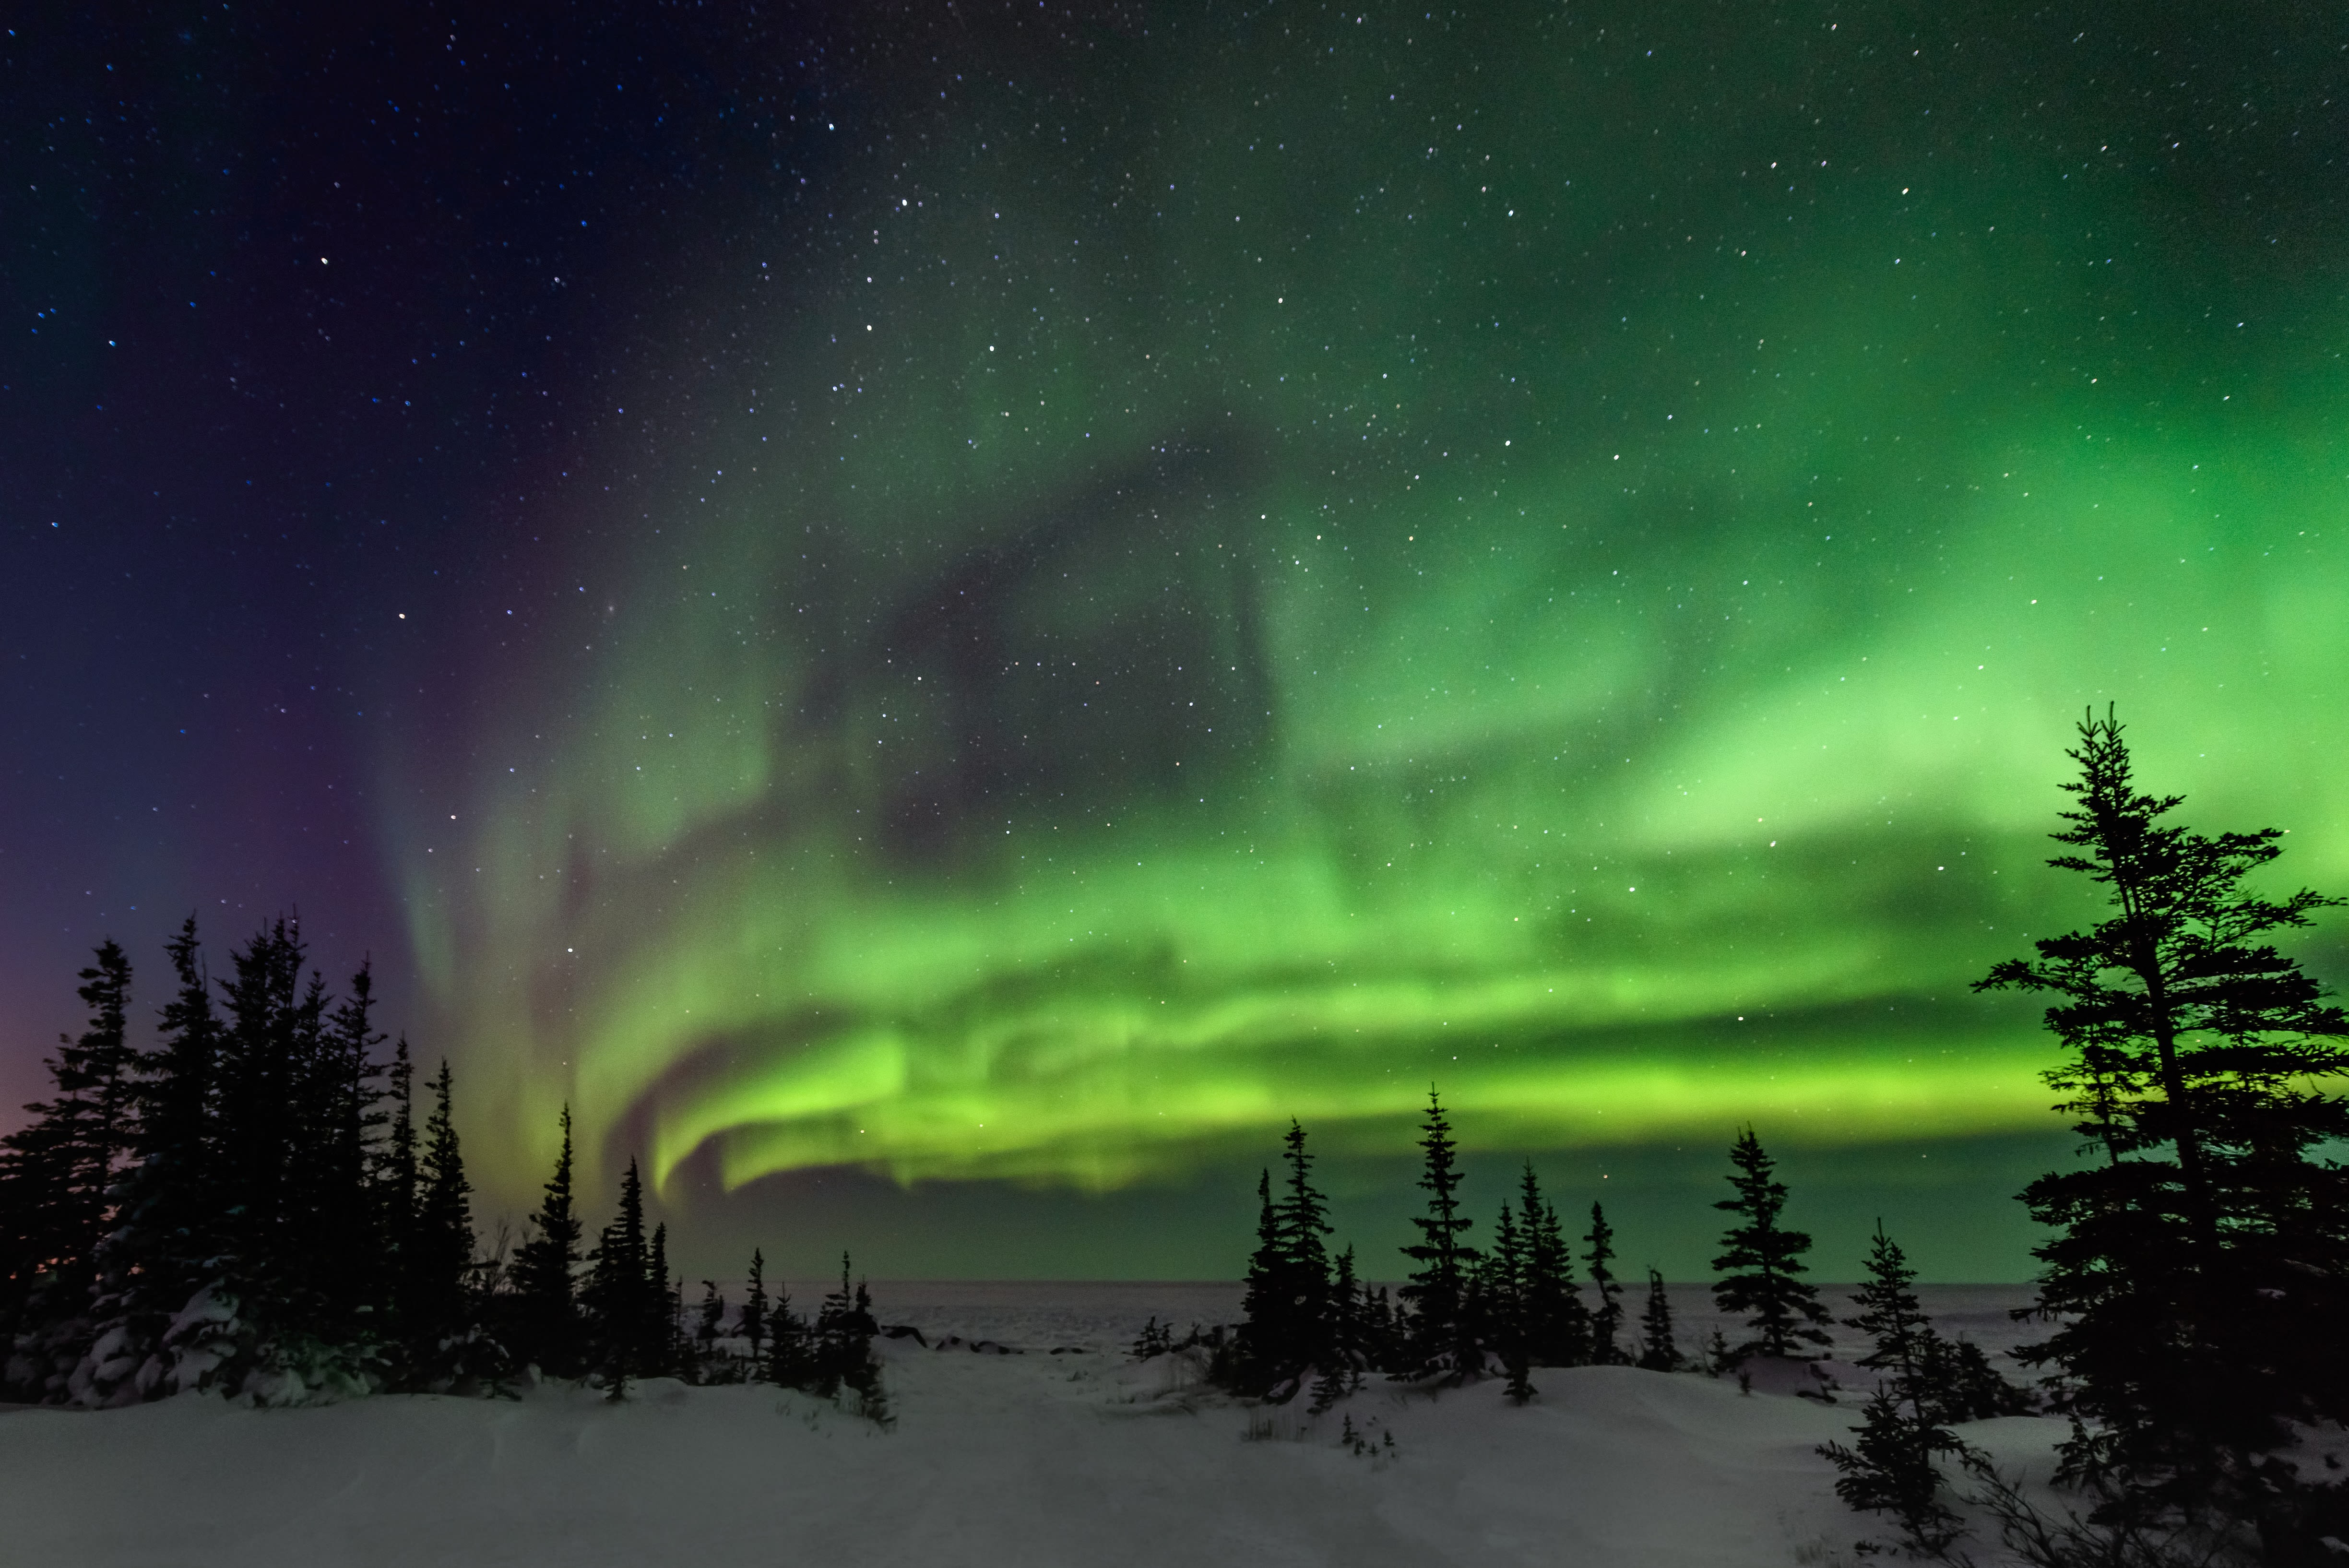 Northern lights could be visible across the U.S. this weekend because of a severe geomagnetic storm. Here's how you could see it.